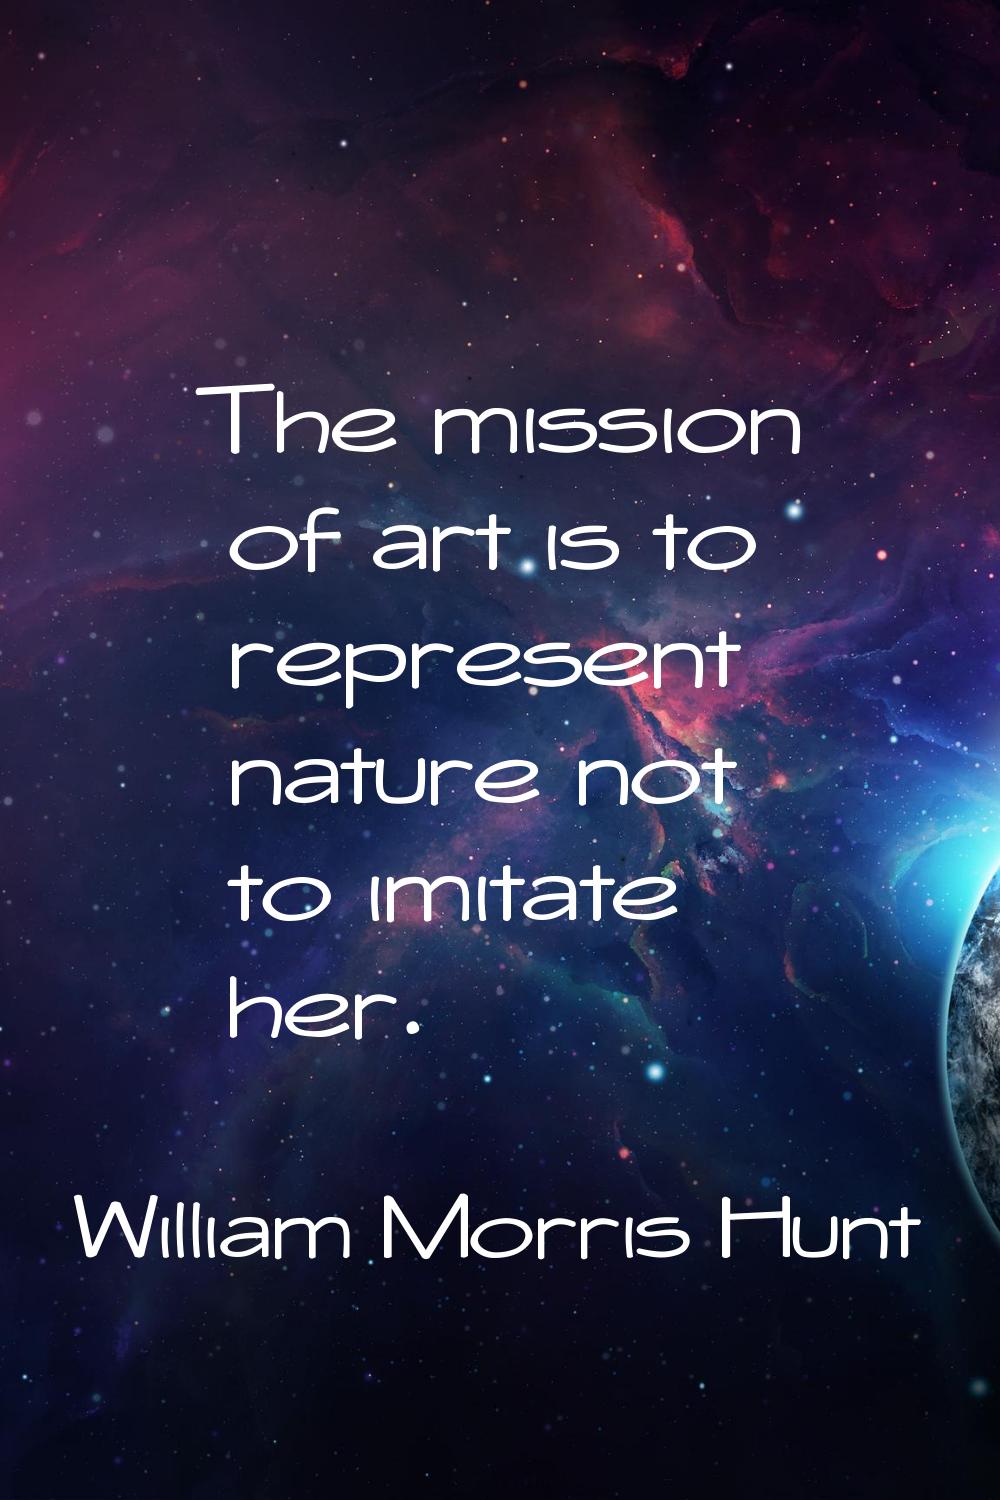 The mission of art is to represent nature not to imitate her.